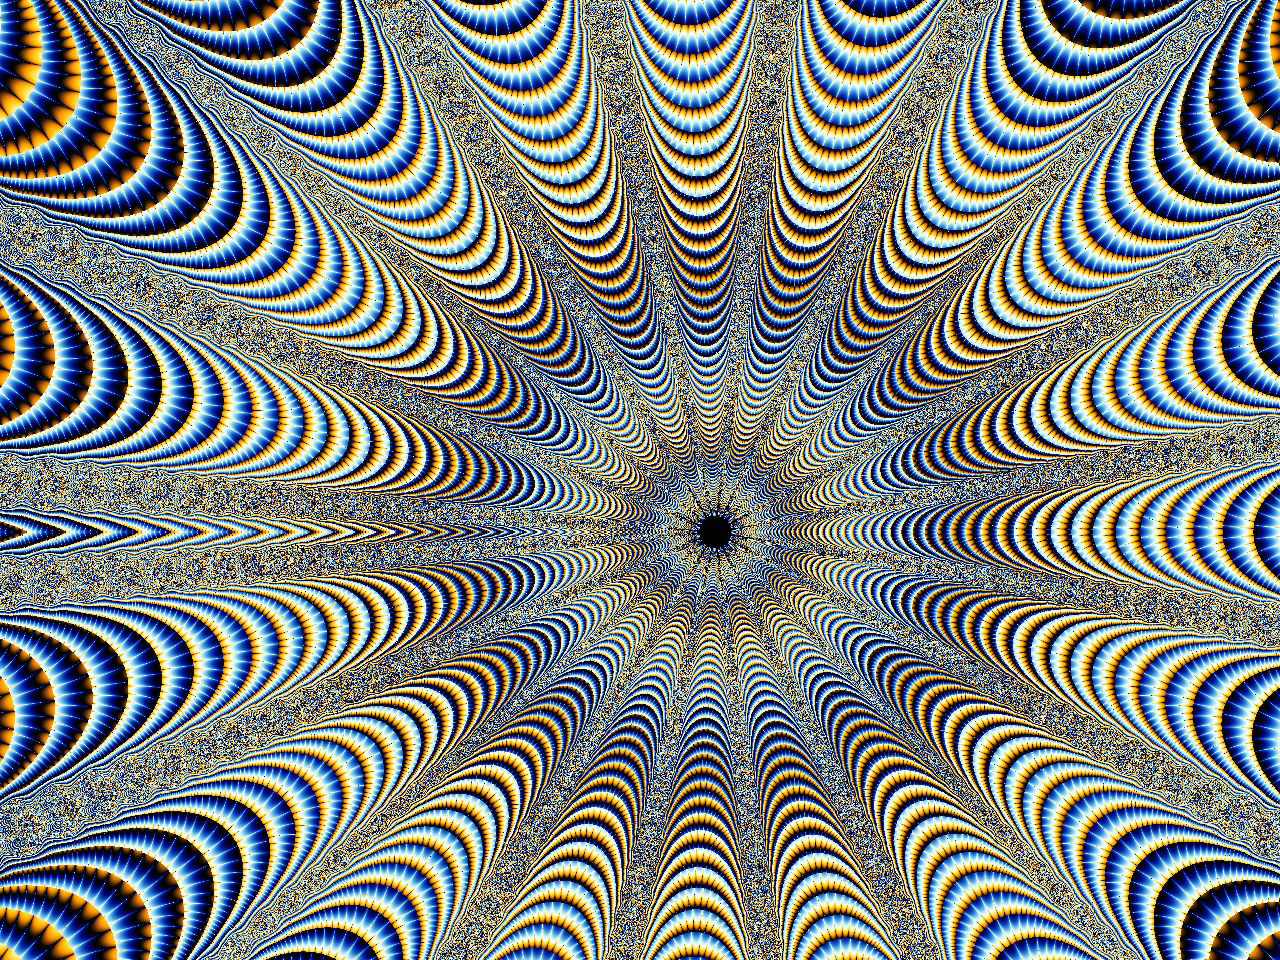 521 Psychedelic HD Wallpapers | Backgrounds - Wallpaper Abyss